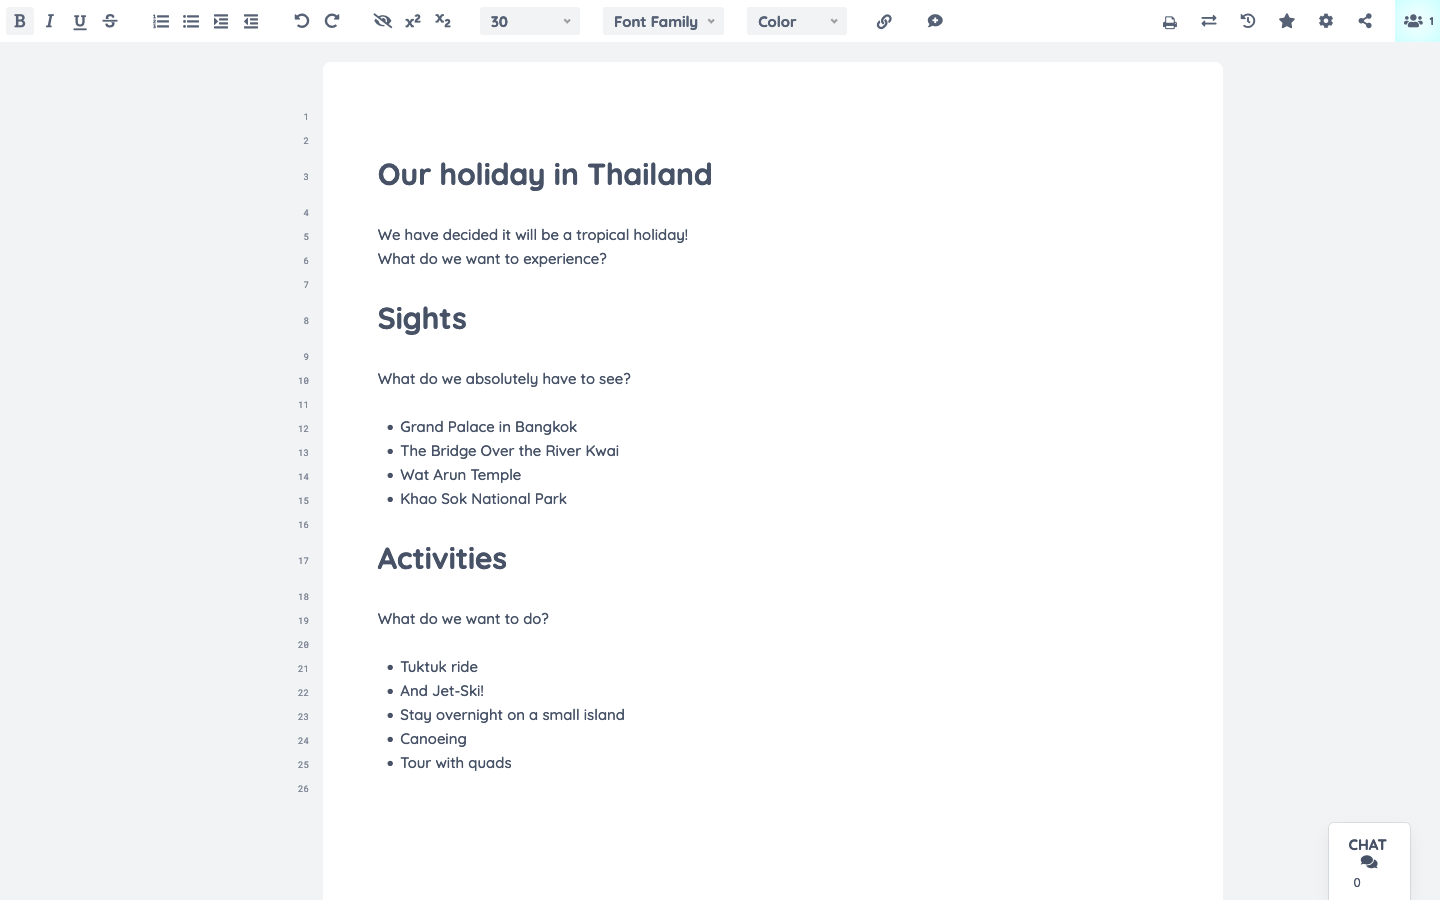 View of an Etherpad with holiday planning notes